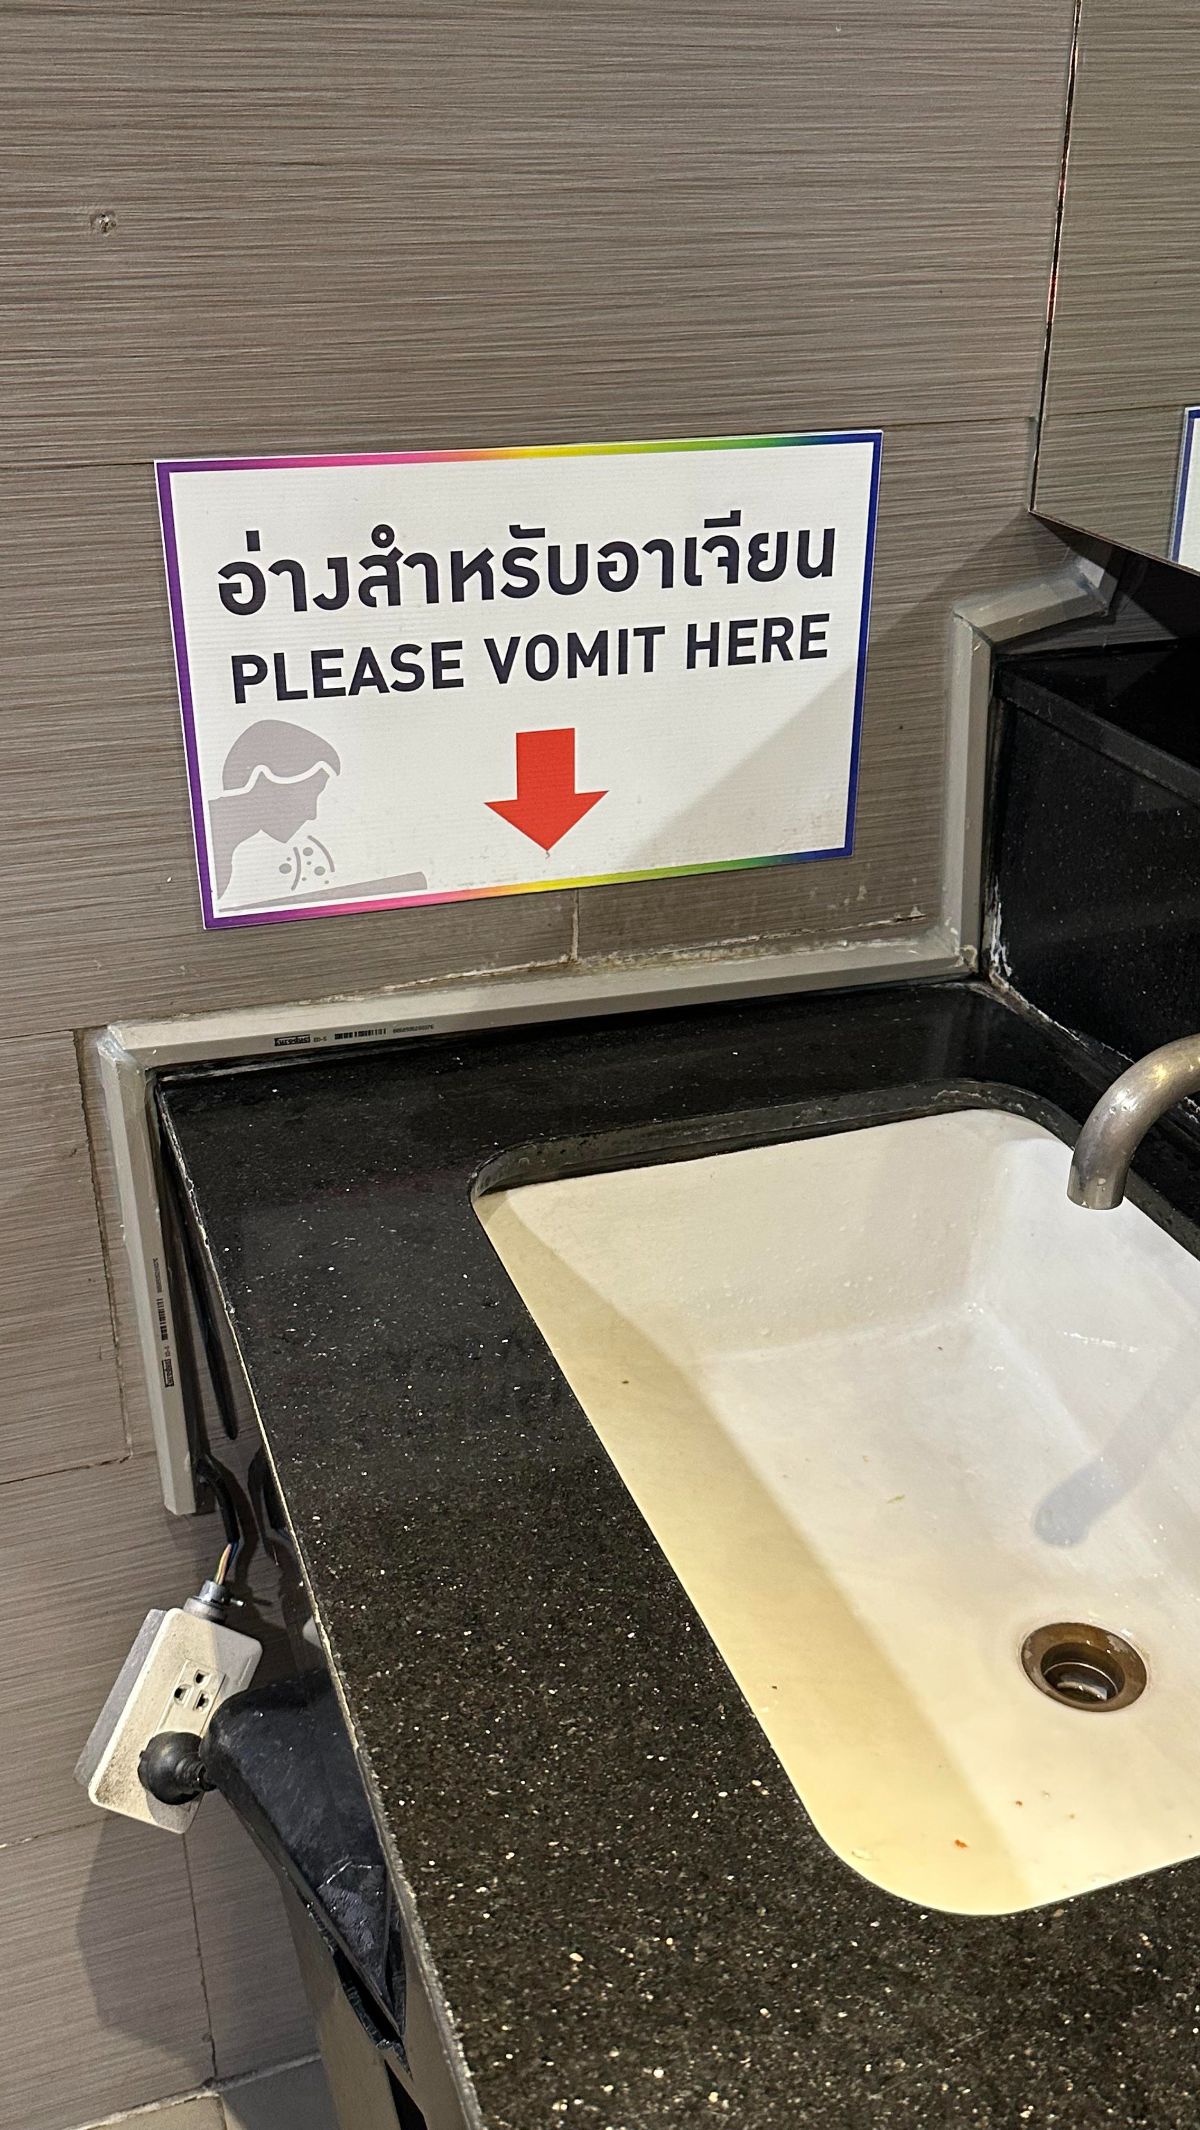 4. Special Sinks for Vomiting: Needed for Nightlife